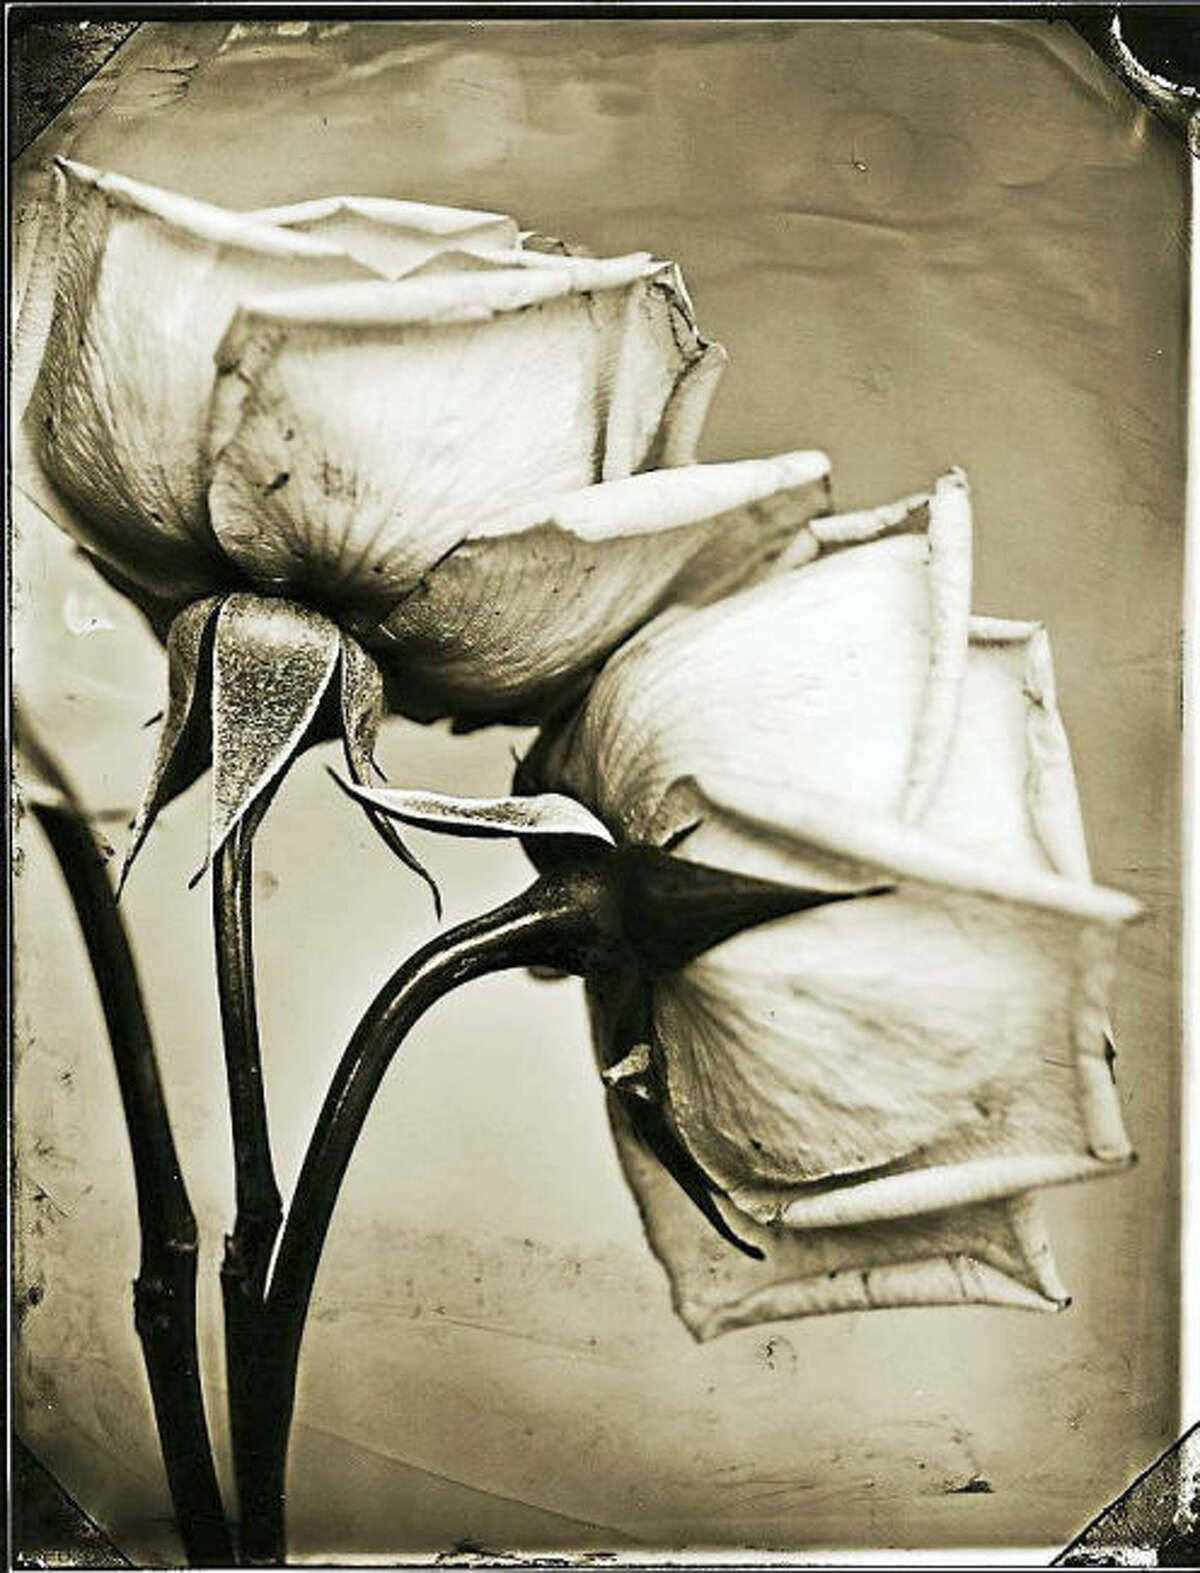 Tom Baril (b. 1952). Two Roses, 2002. Gelatin silver print from wet-plate glass negative. Mattatuck Museum; Gift of Kevin McNamara and Craig Nowak in honor of Nancy Rustico. (Part of “Black & White”)